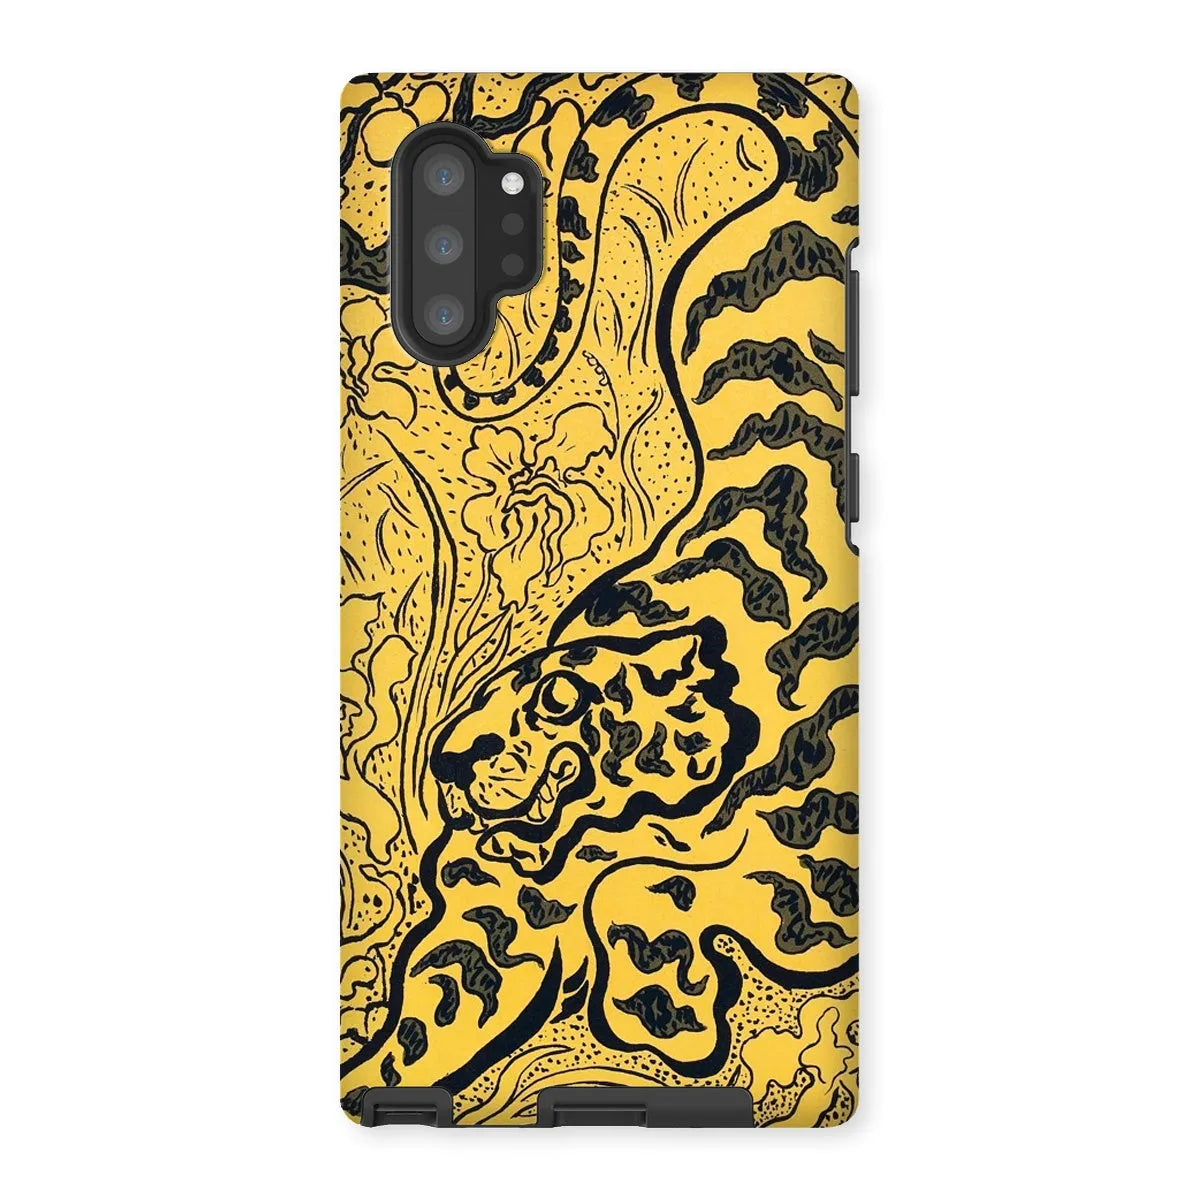 Tiger In The Jungle - Graphic Art Phone Case - Paul Ranson - Samsung Galaxy Note 10p / Matte - Mobile Phone Cases